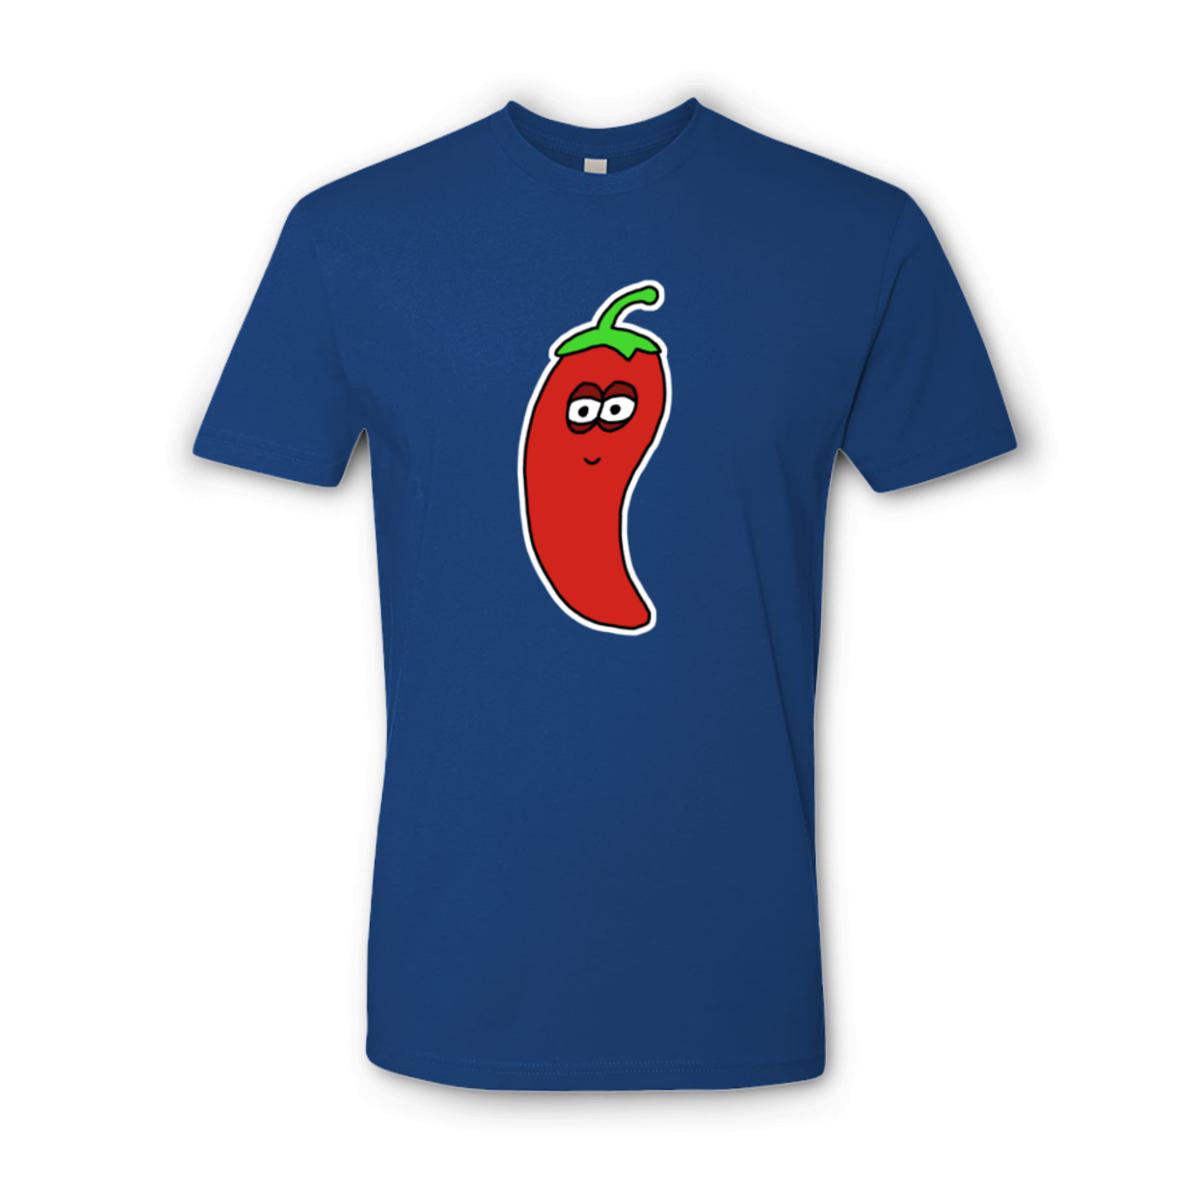 Chili Pepper Unisex Tee Small royal-blue